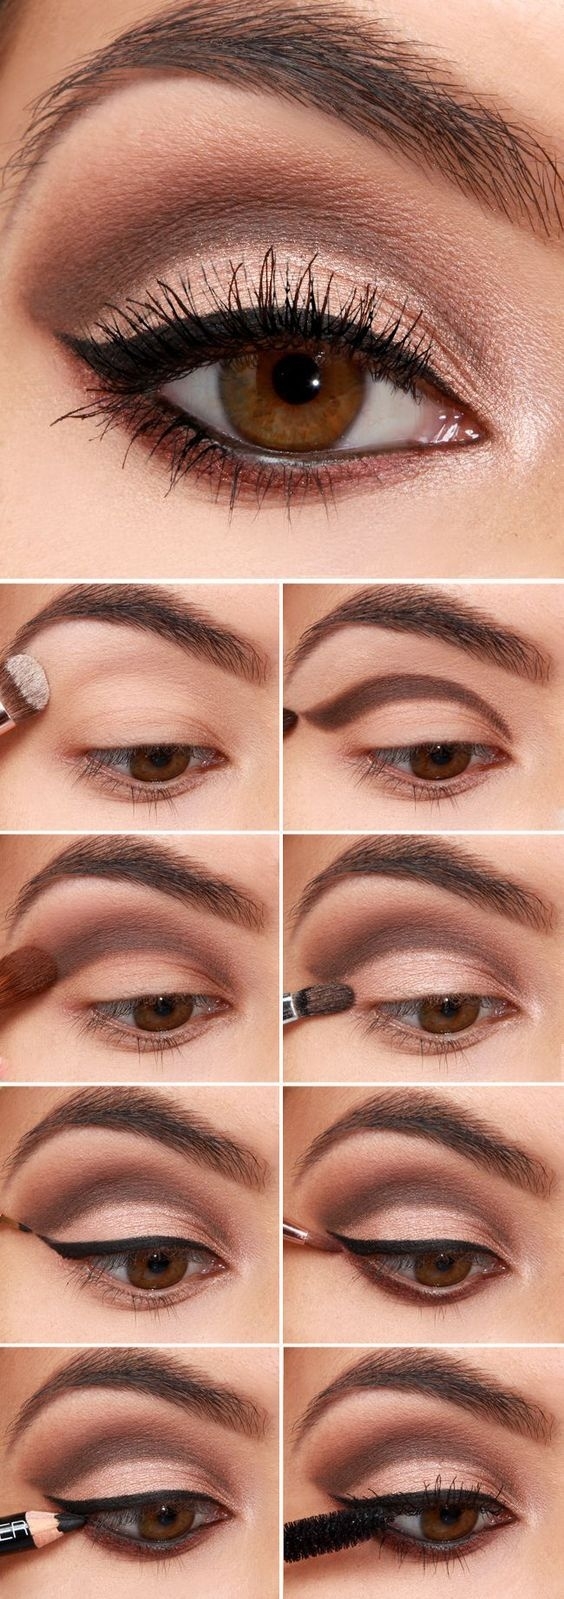 32 Easy Step By Step Eyeshadow Tutorials For Beginners | Makeup with regard to Easy Eye Makeup For Brown Eyes Step By Step